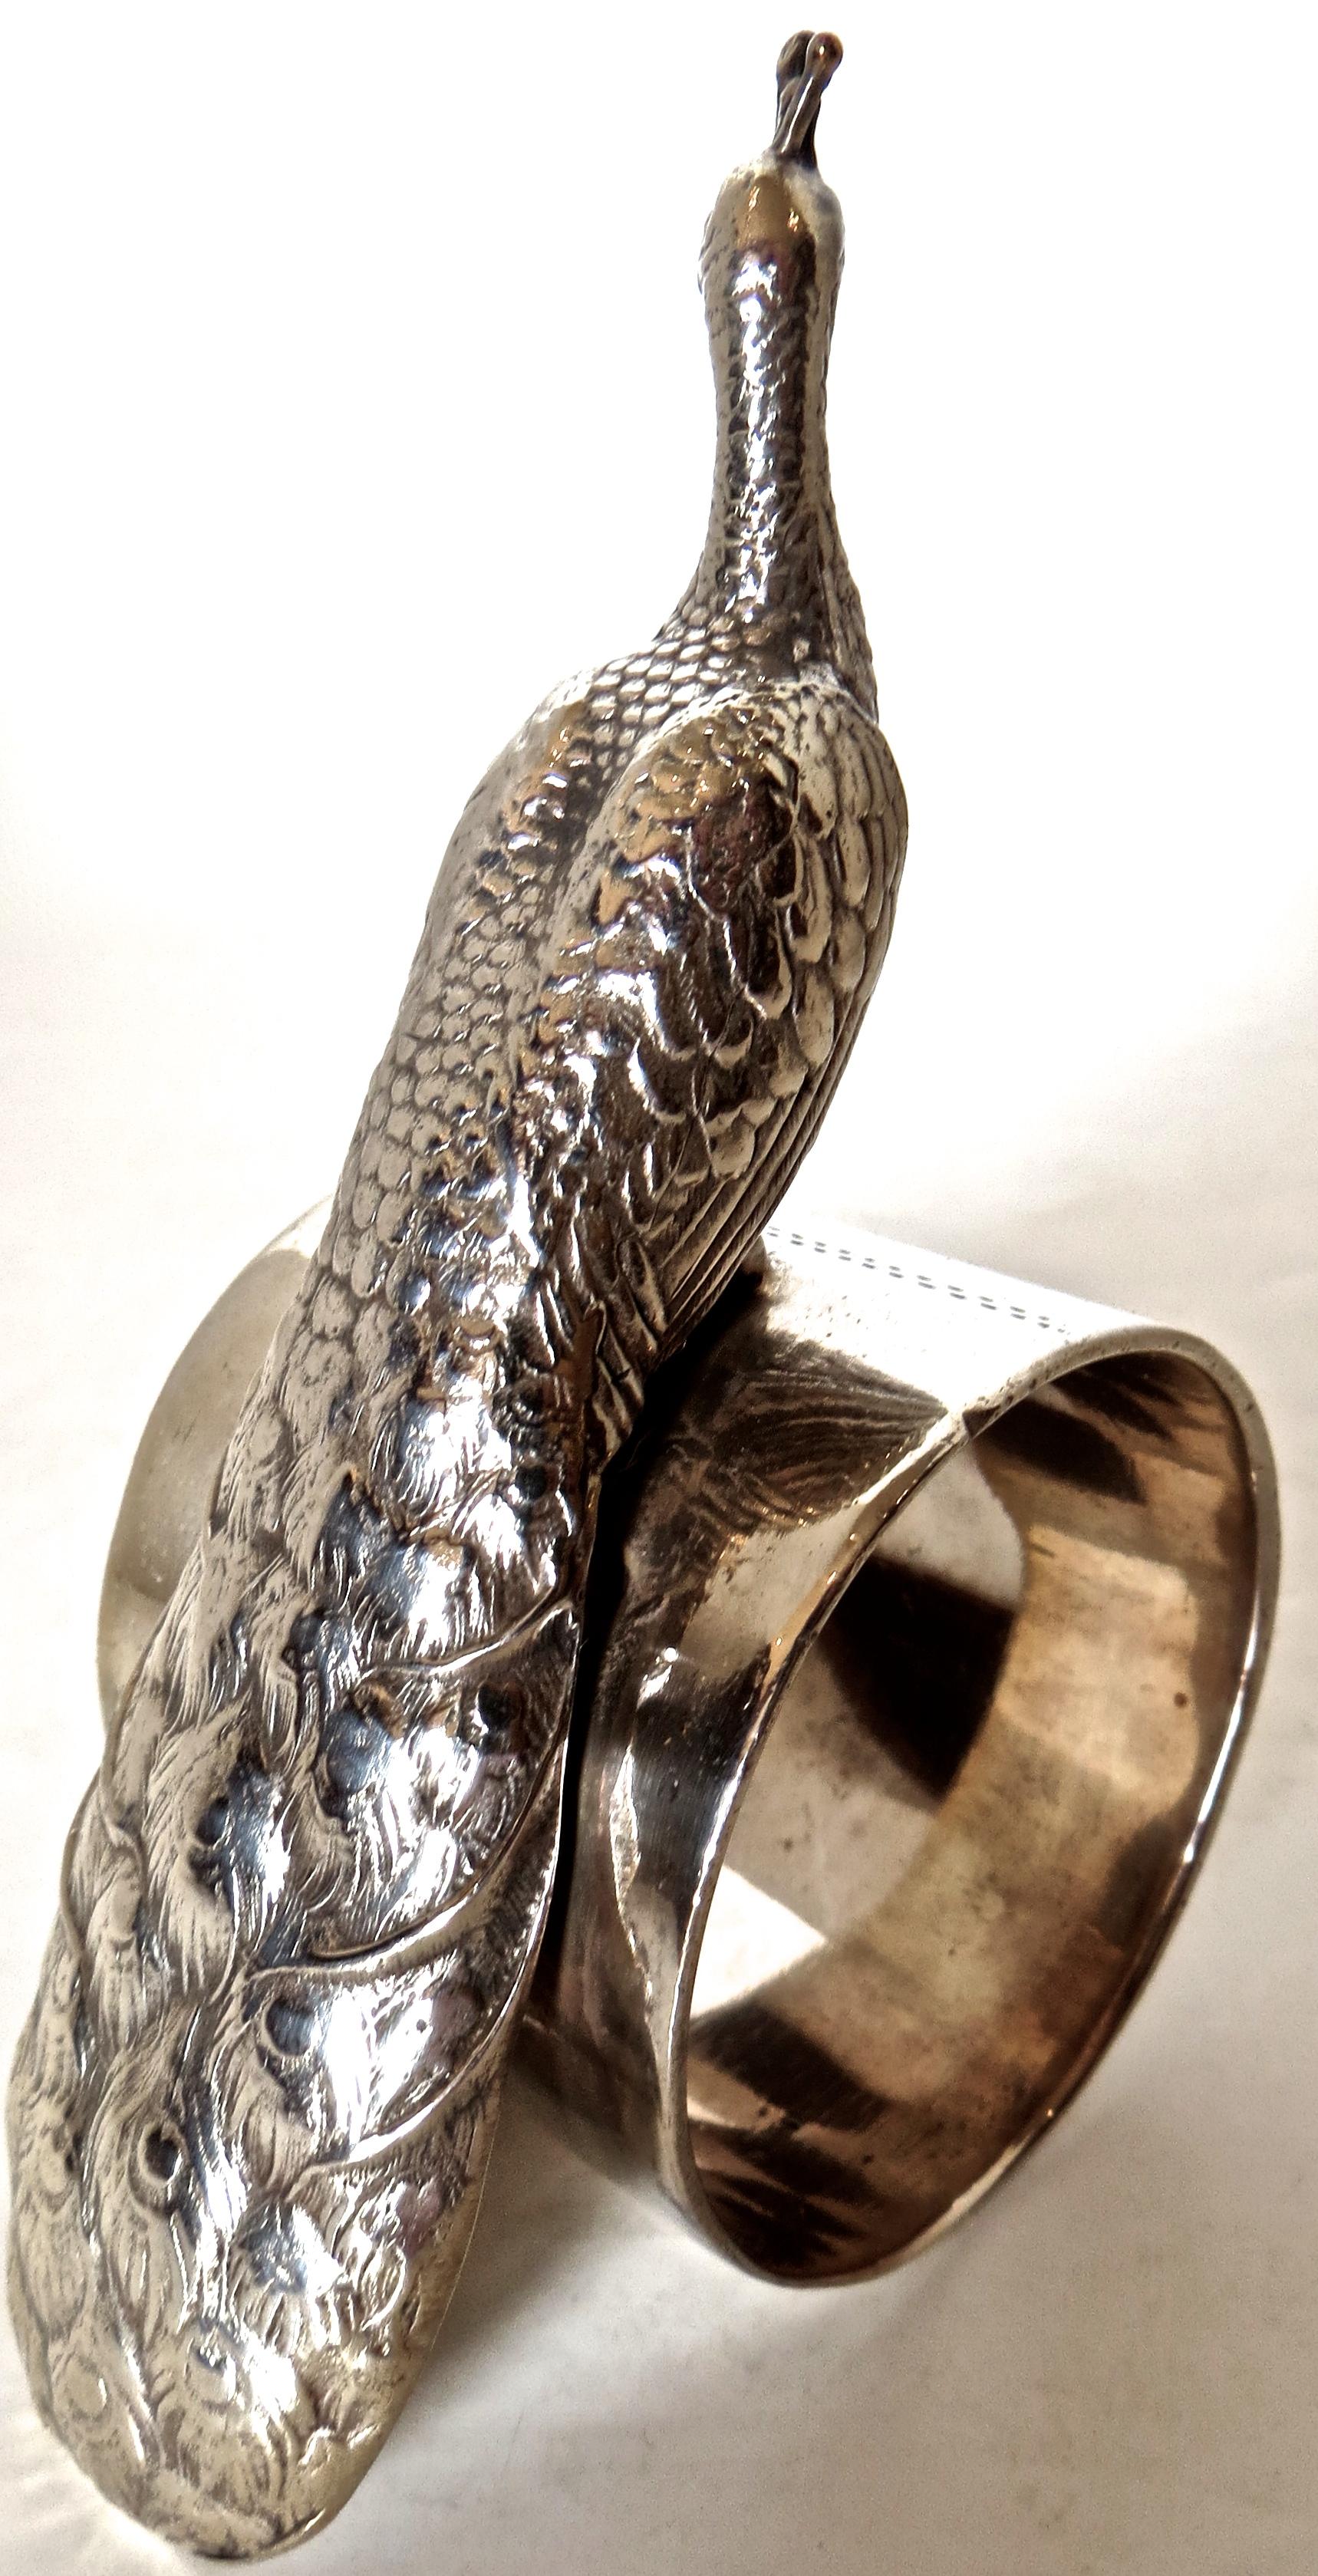 Birds of all types were a common theme for Victorian silver plated napkin rings. Of American manufacture, this particular ring depicts a highly detailed peacock with broad flowing feathers sitting atop a circular ring. In relief and etched to the